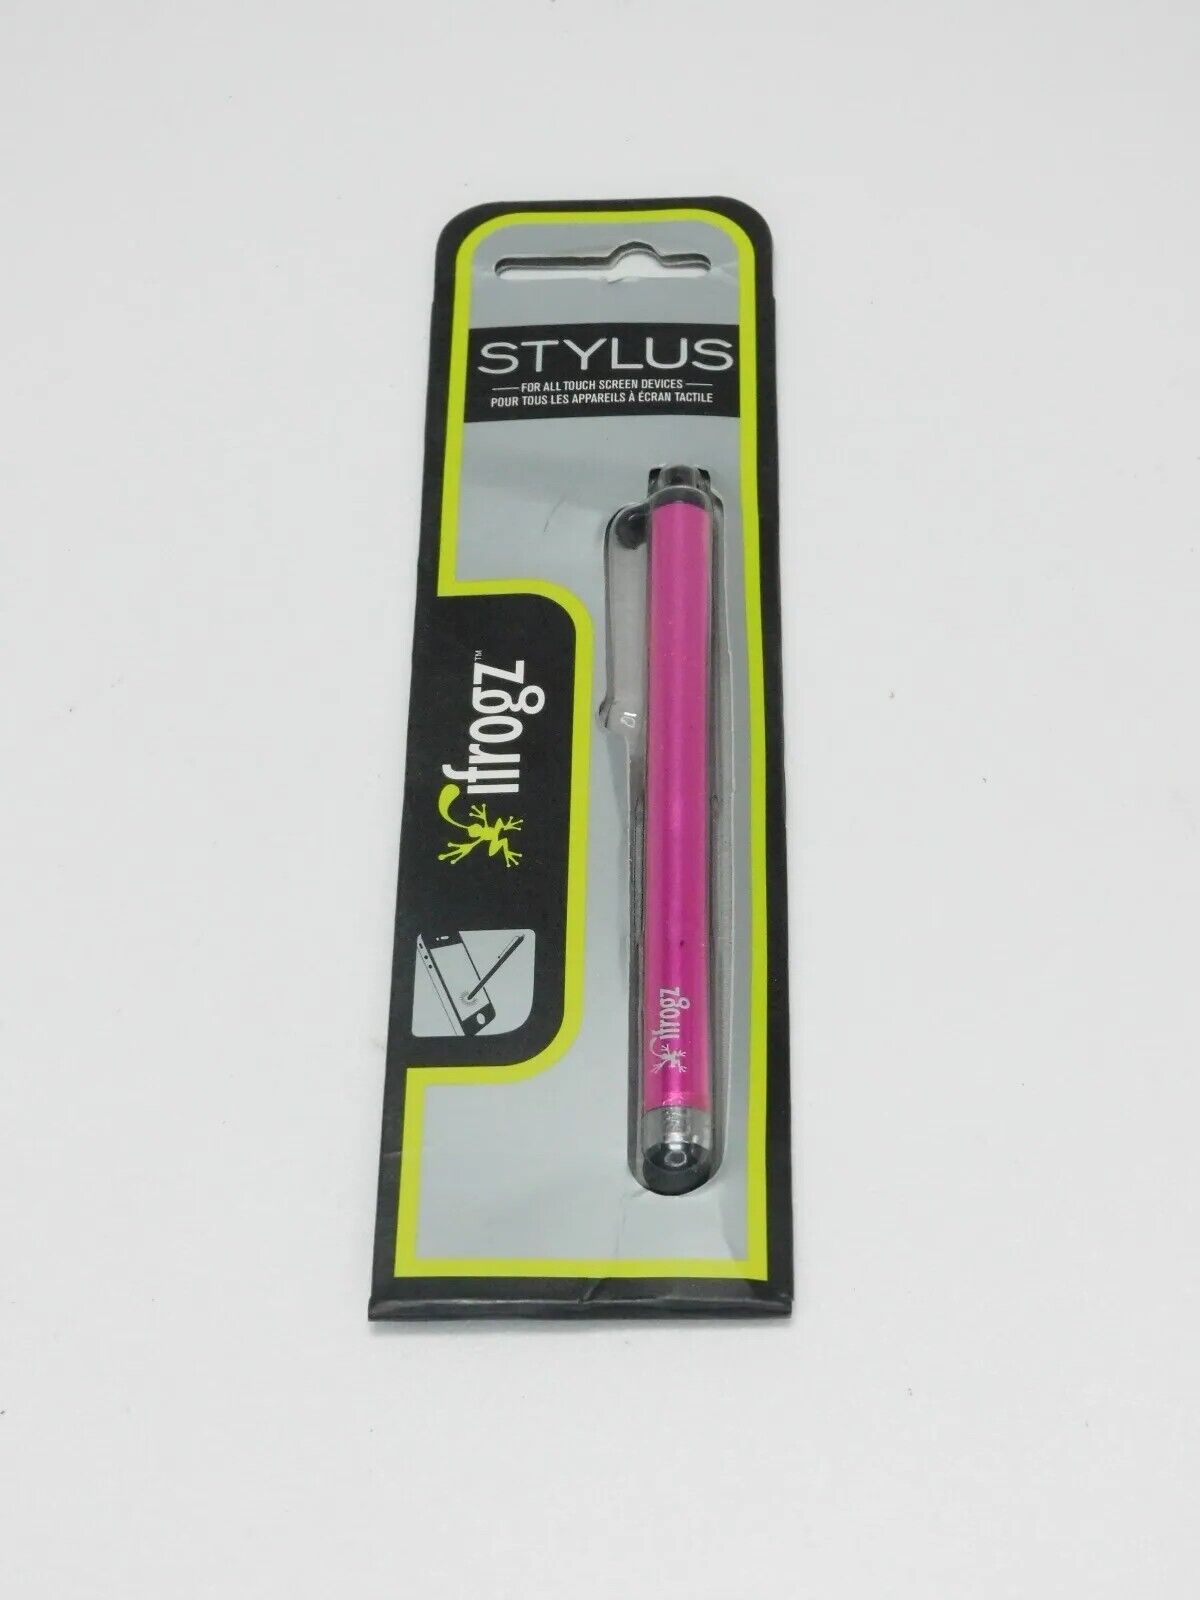 Lot of 10 iFrogz Stylus Pencils for Apple Android & Touch Screen Devices - Pink